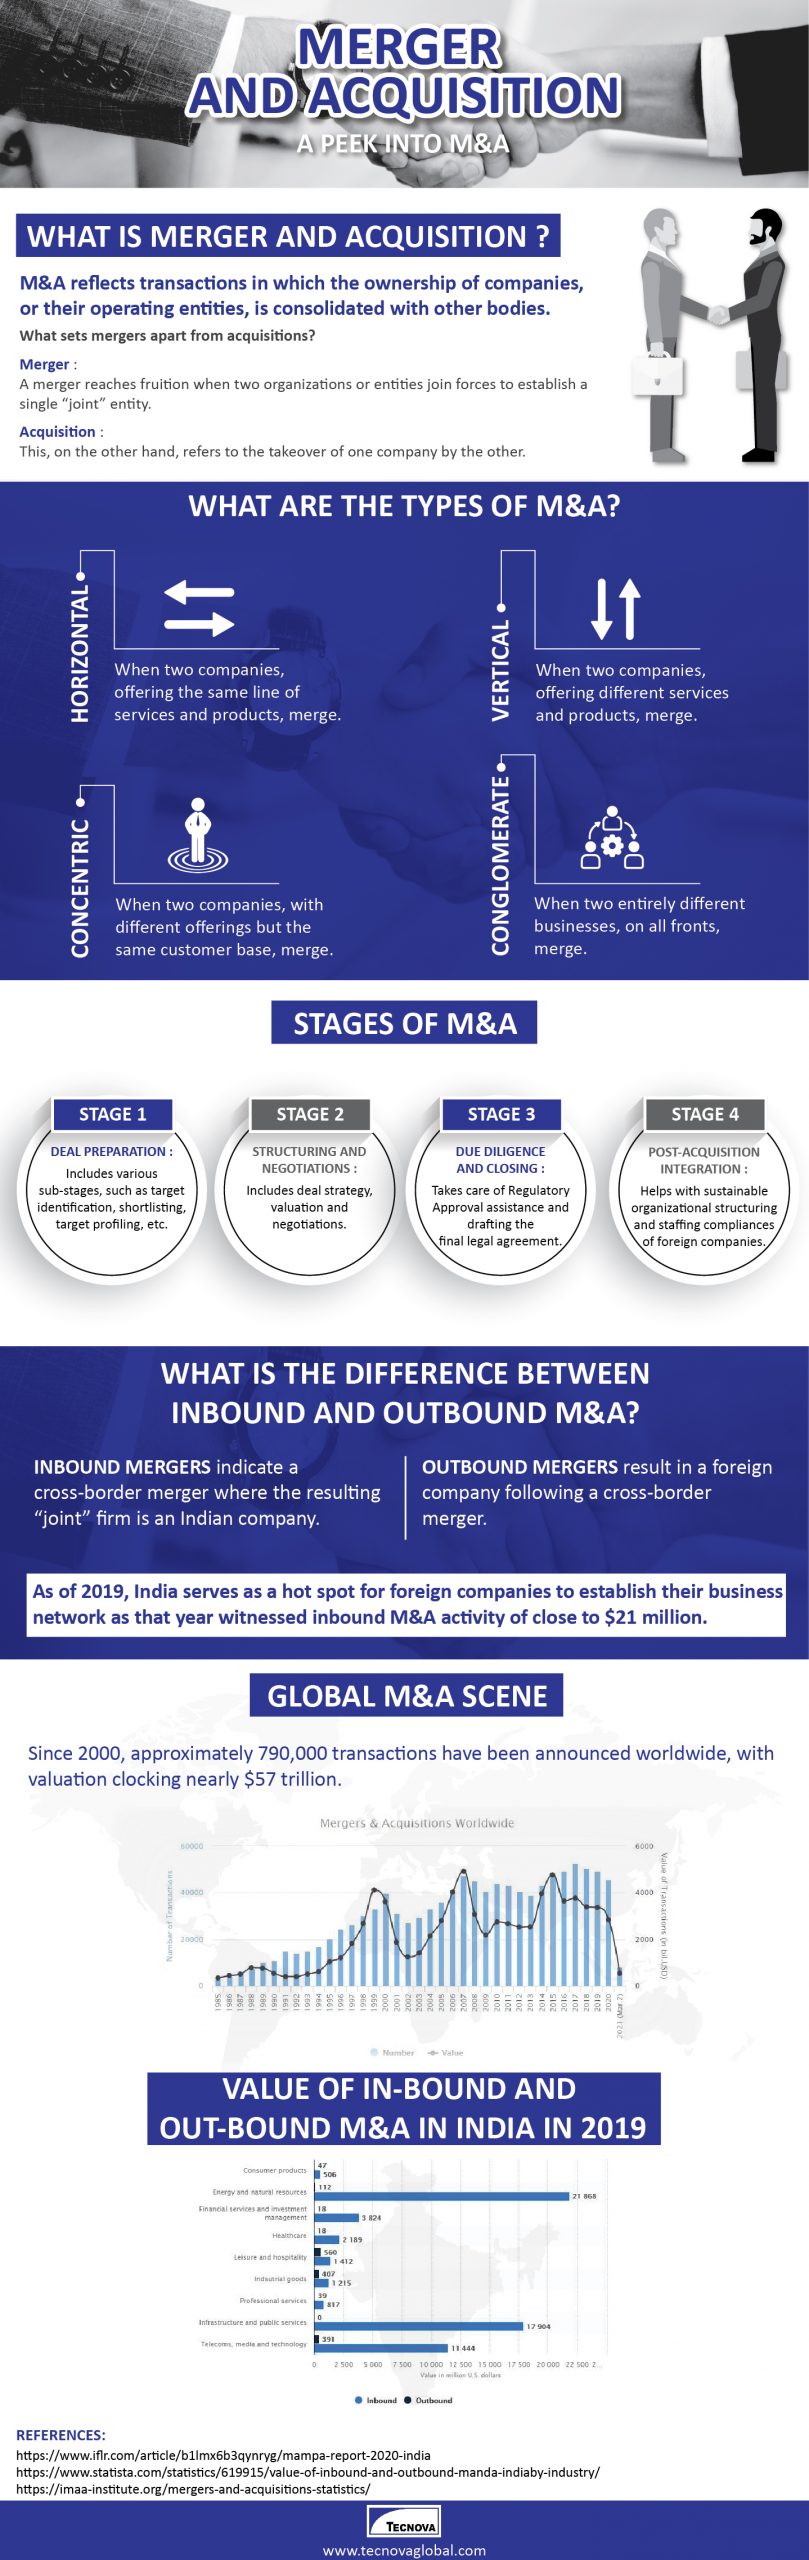 Merger and acquisition (A peek into M&A) Infographic